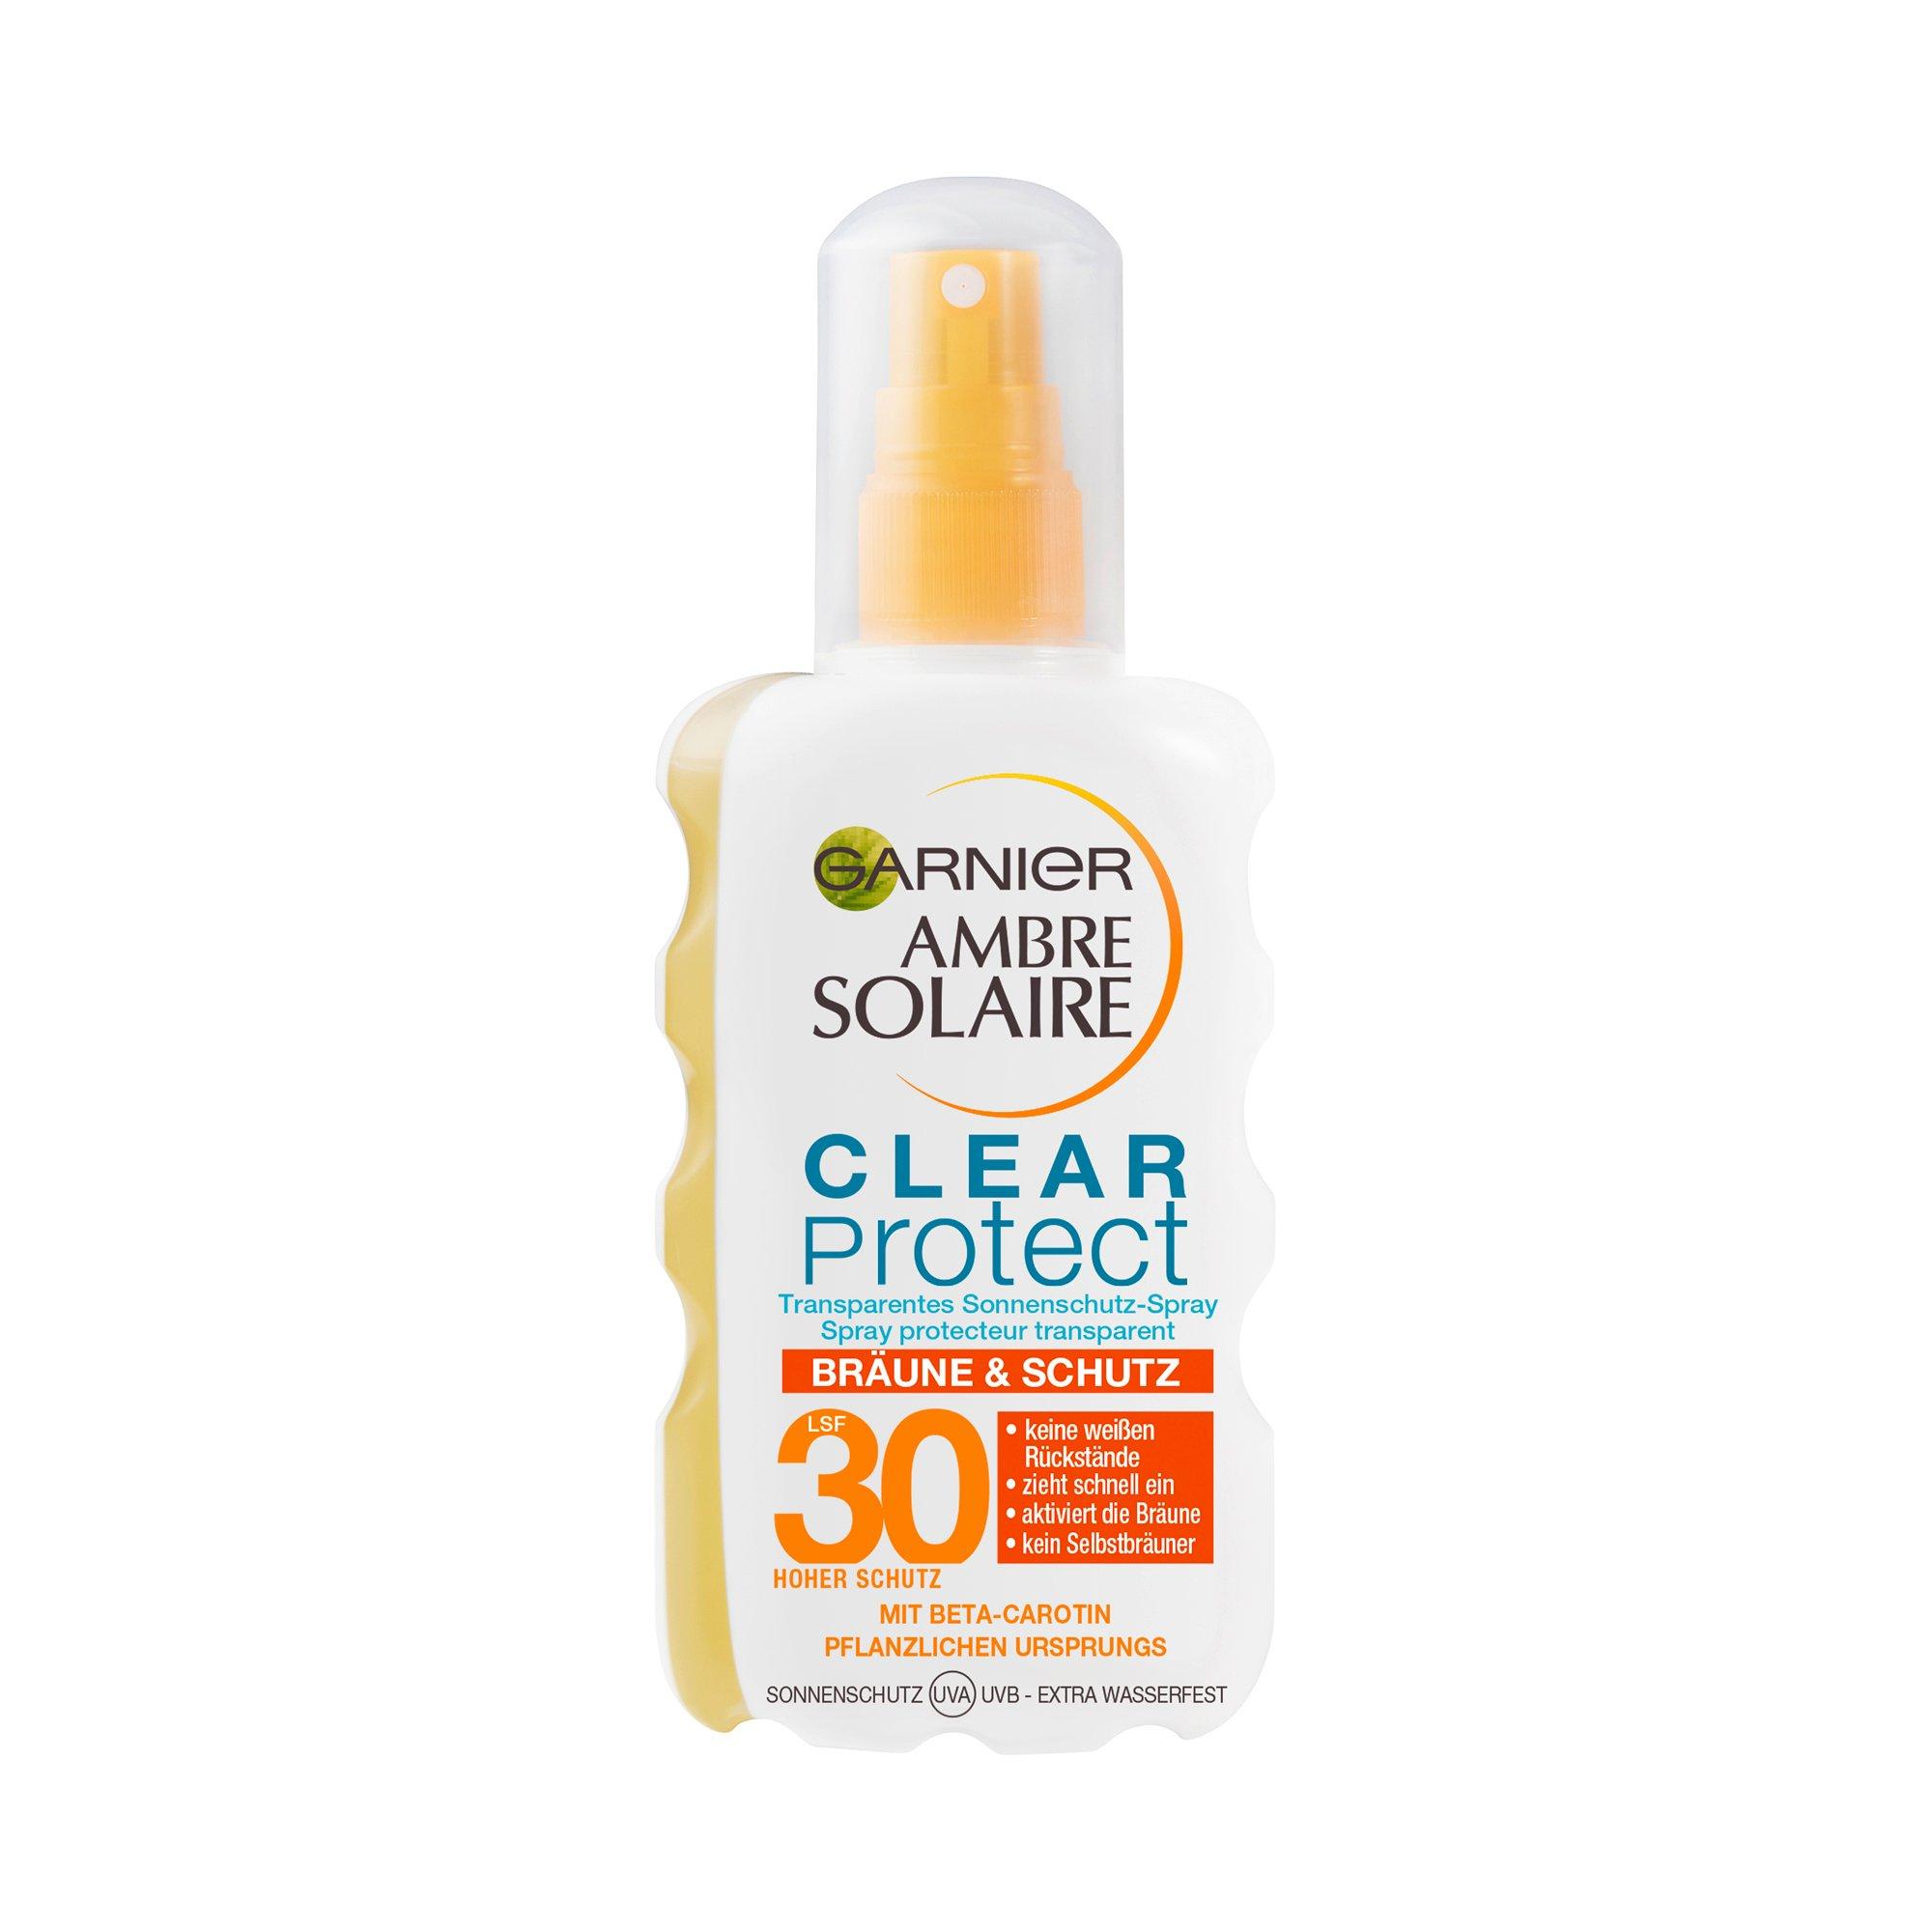 Clear AMBRE Bronze Clear Protect kaufen - 30+ | AS MANOR Prot online SOLAIRE Bronze